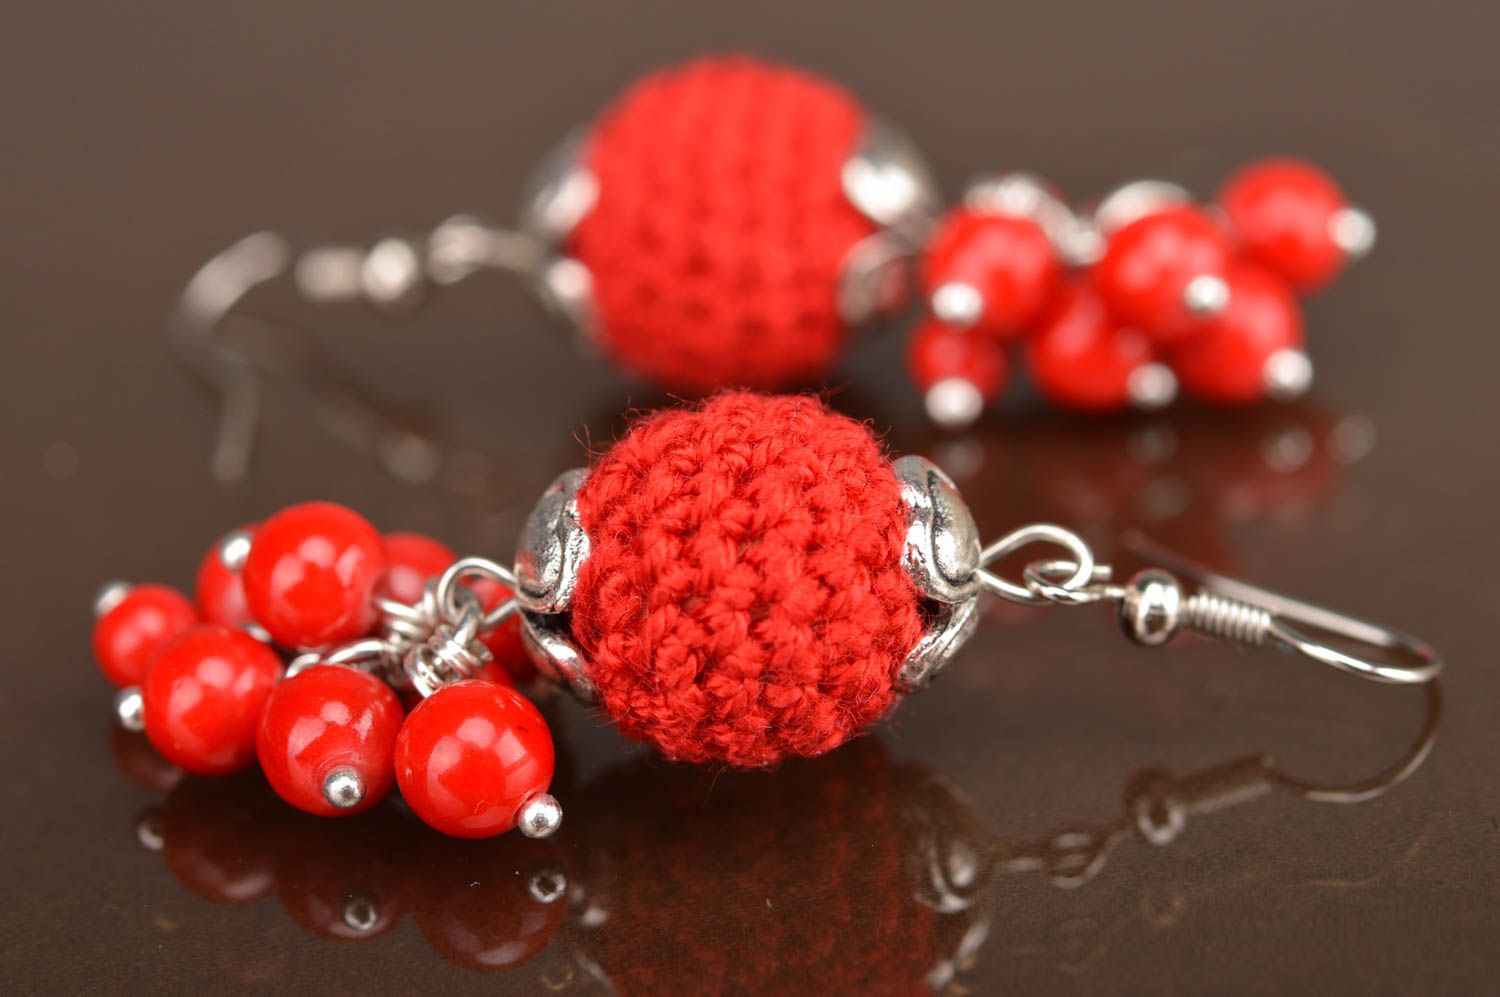 Designer earrings with red crocheted over beads handmade stylish accessory photo 3